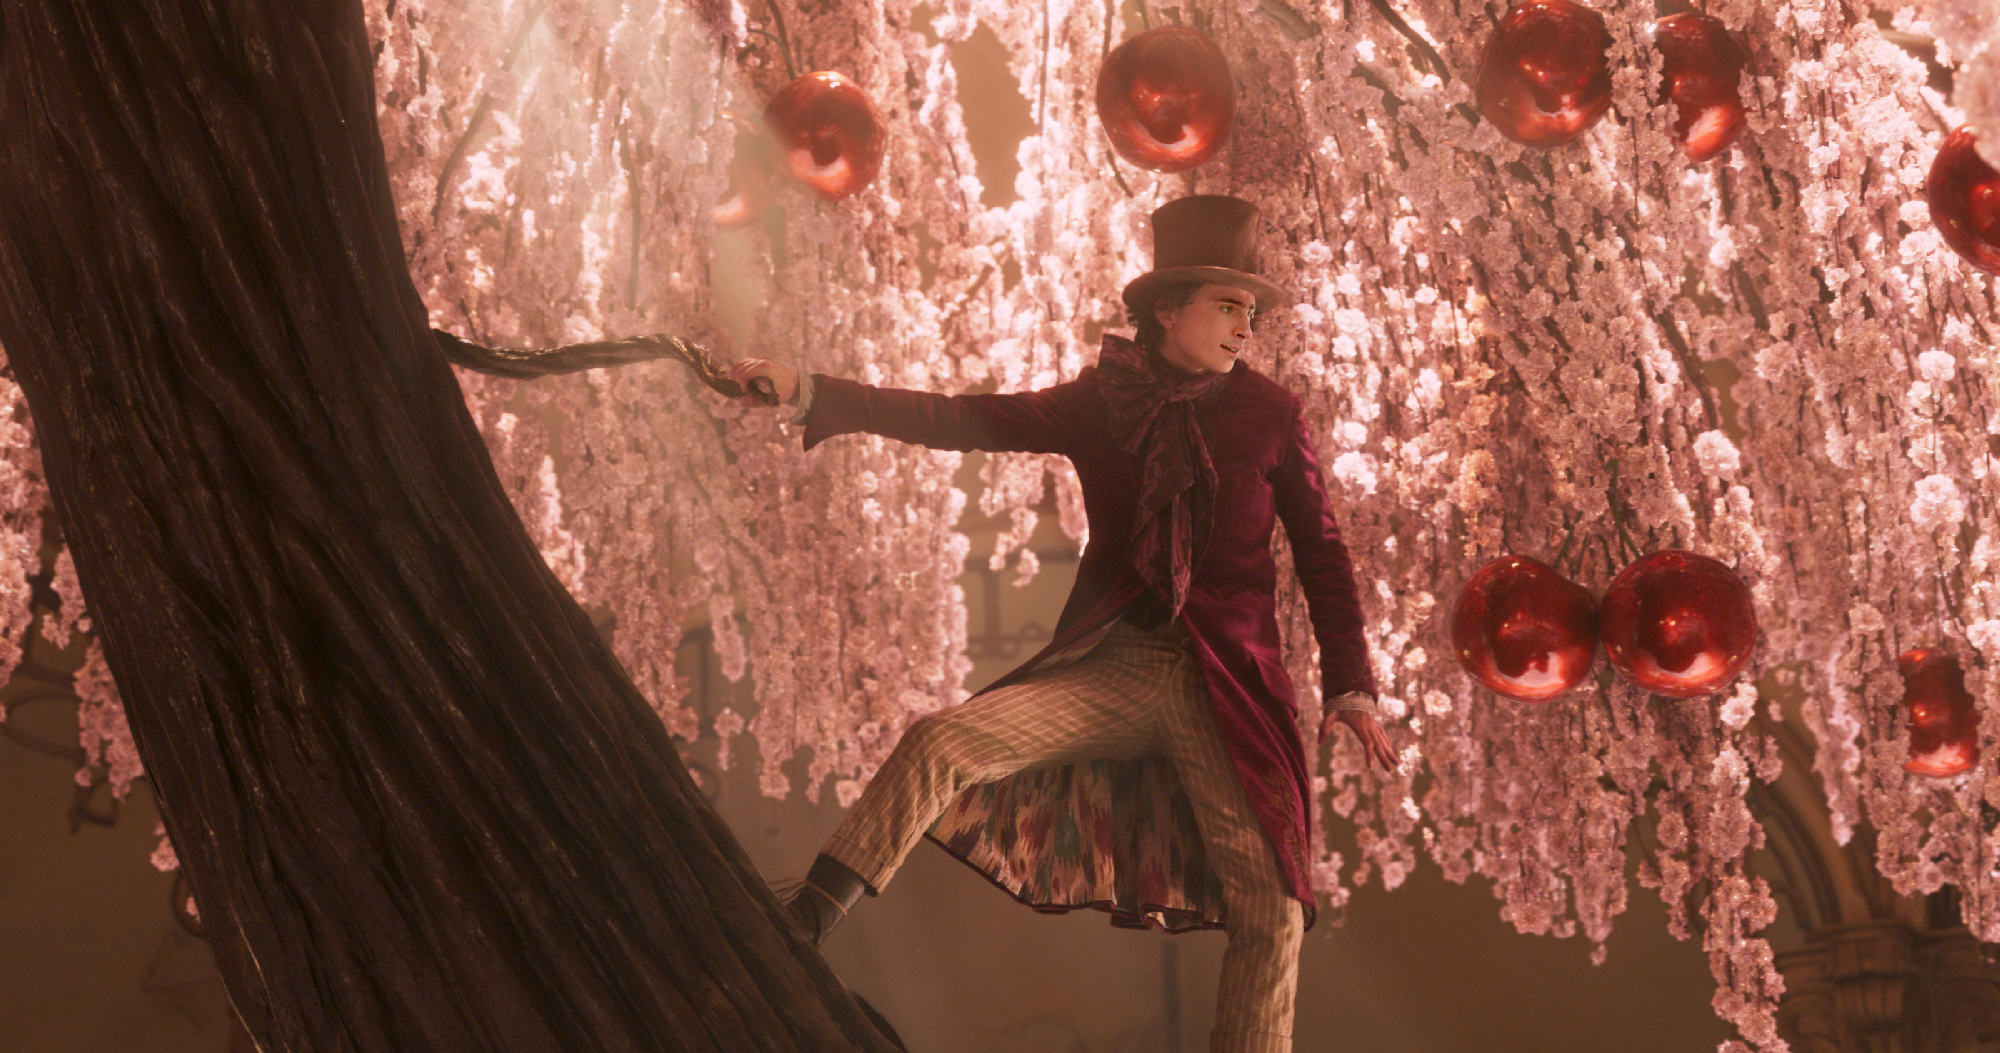 Man in top hat and Victorian clothes stands on angled trunk of tree with pink flowered branches and shiny red orbs hanging from it